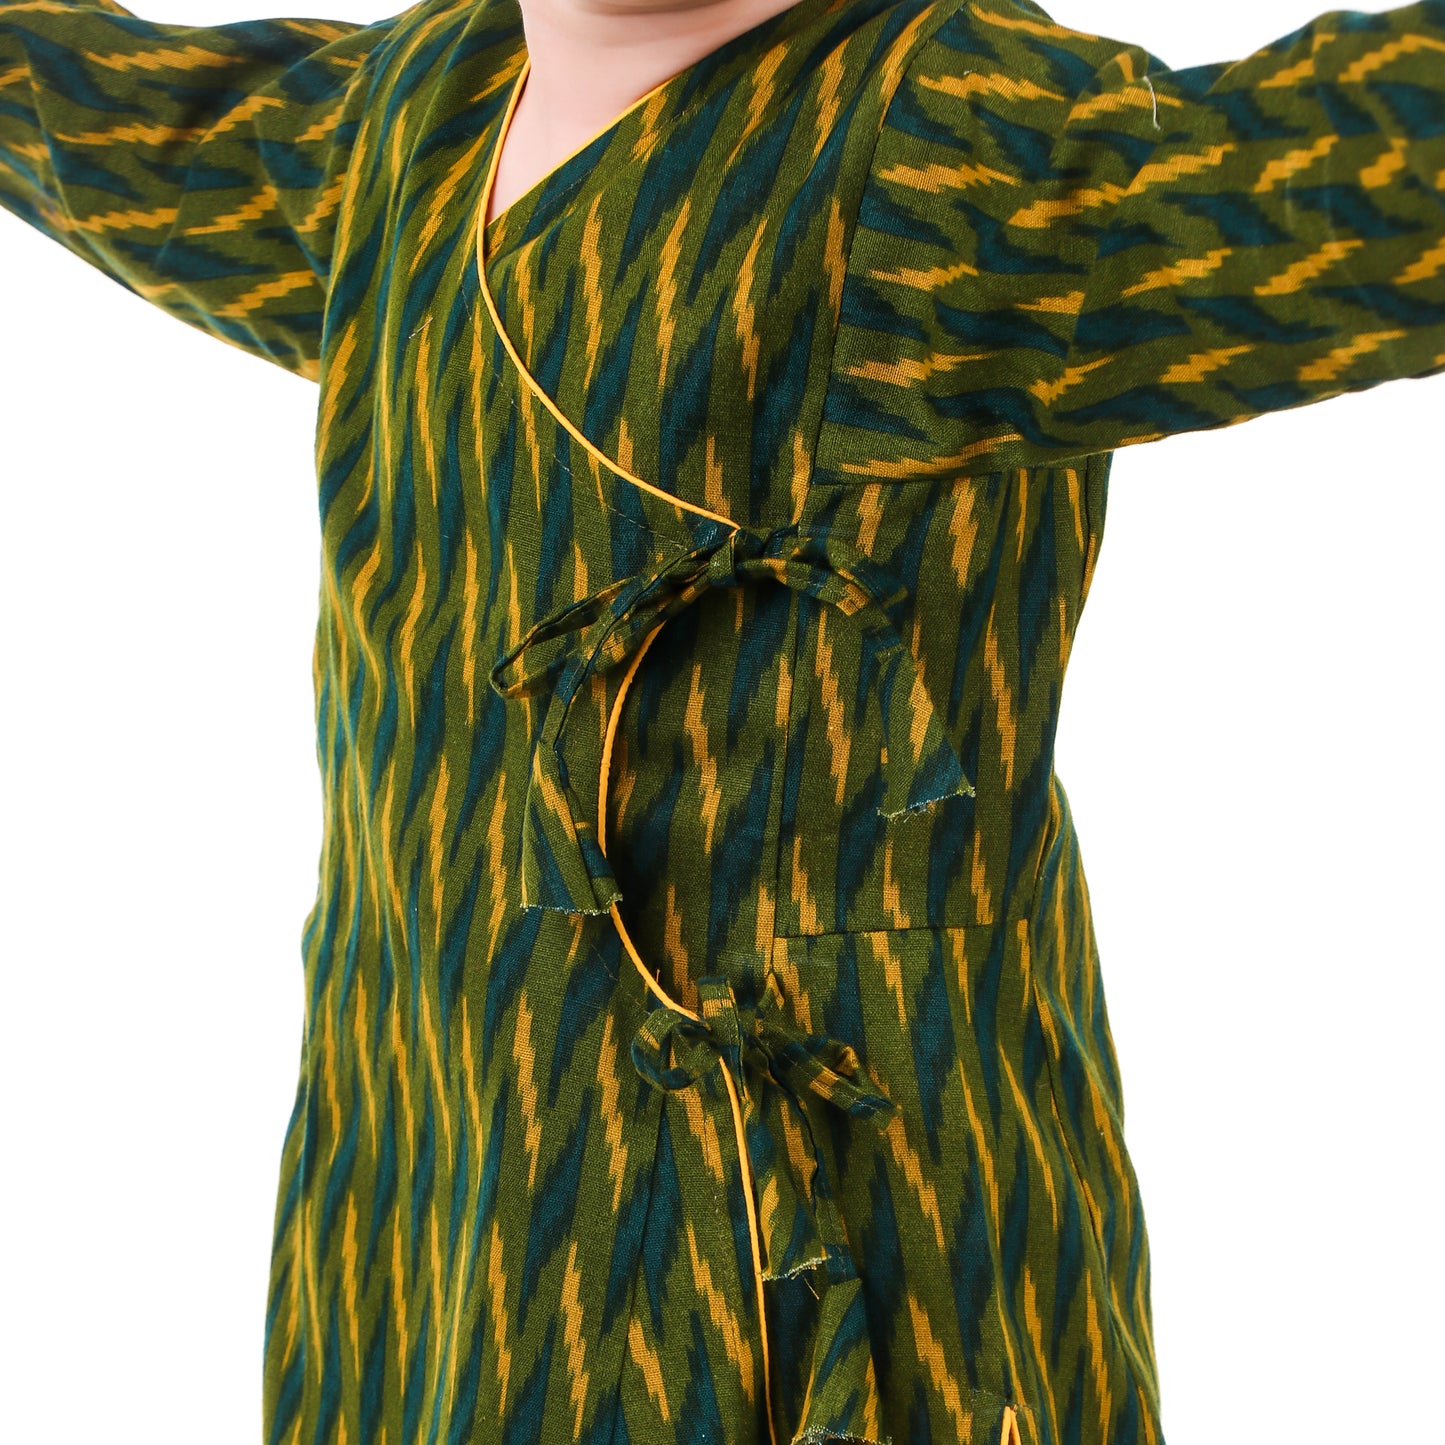 Green Dhoti Kurta for Boys, Ages 3 Months-16 Years, Cotton, Angrakha Style, Ikat Print